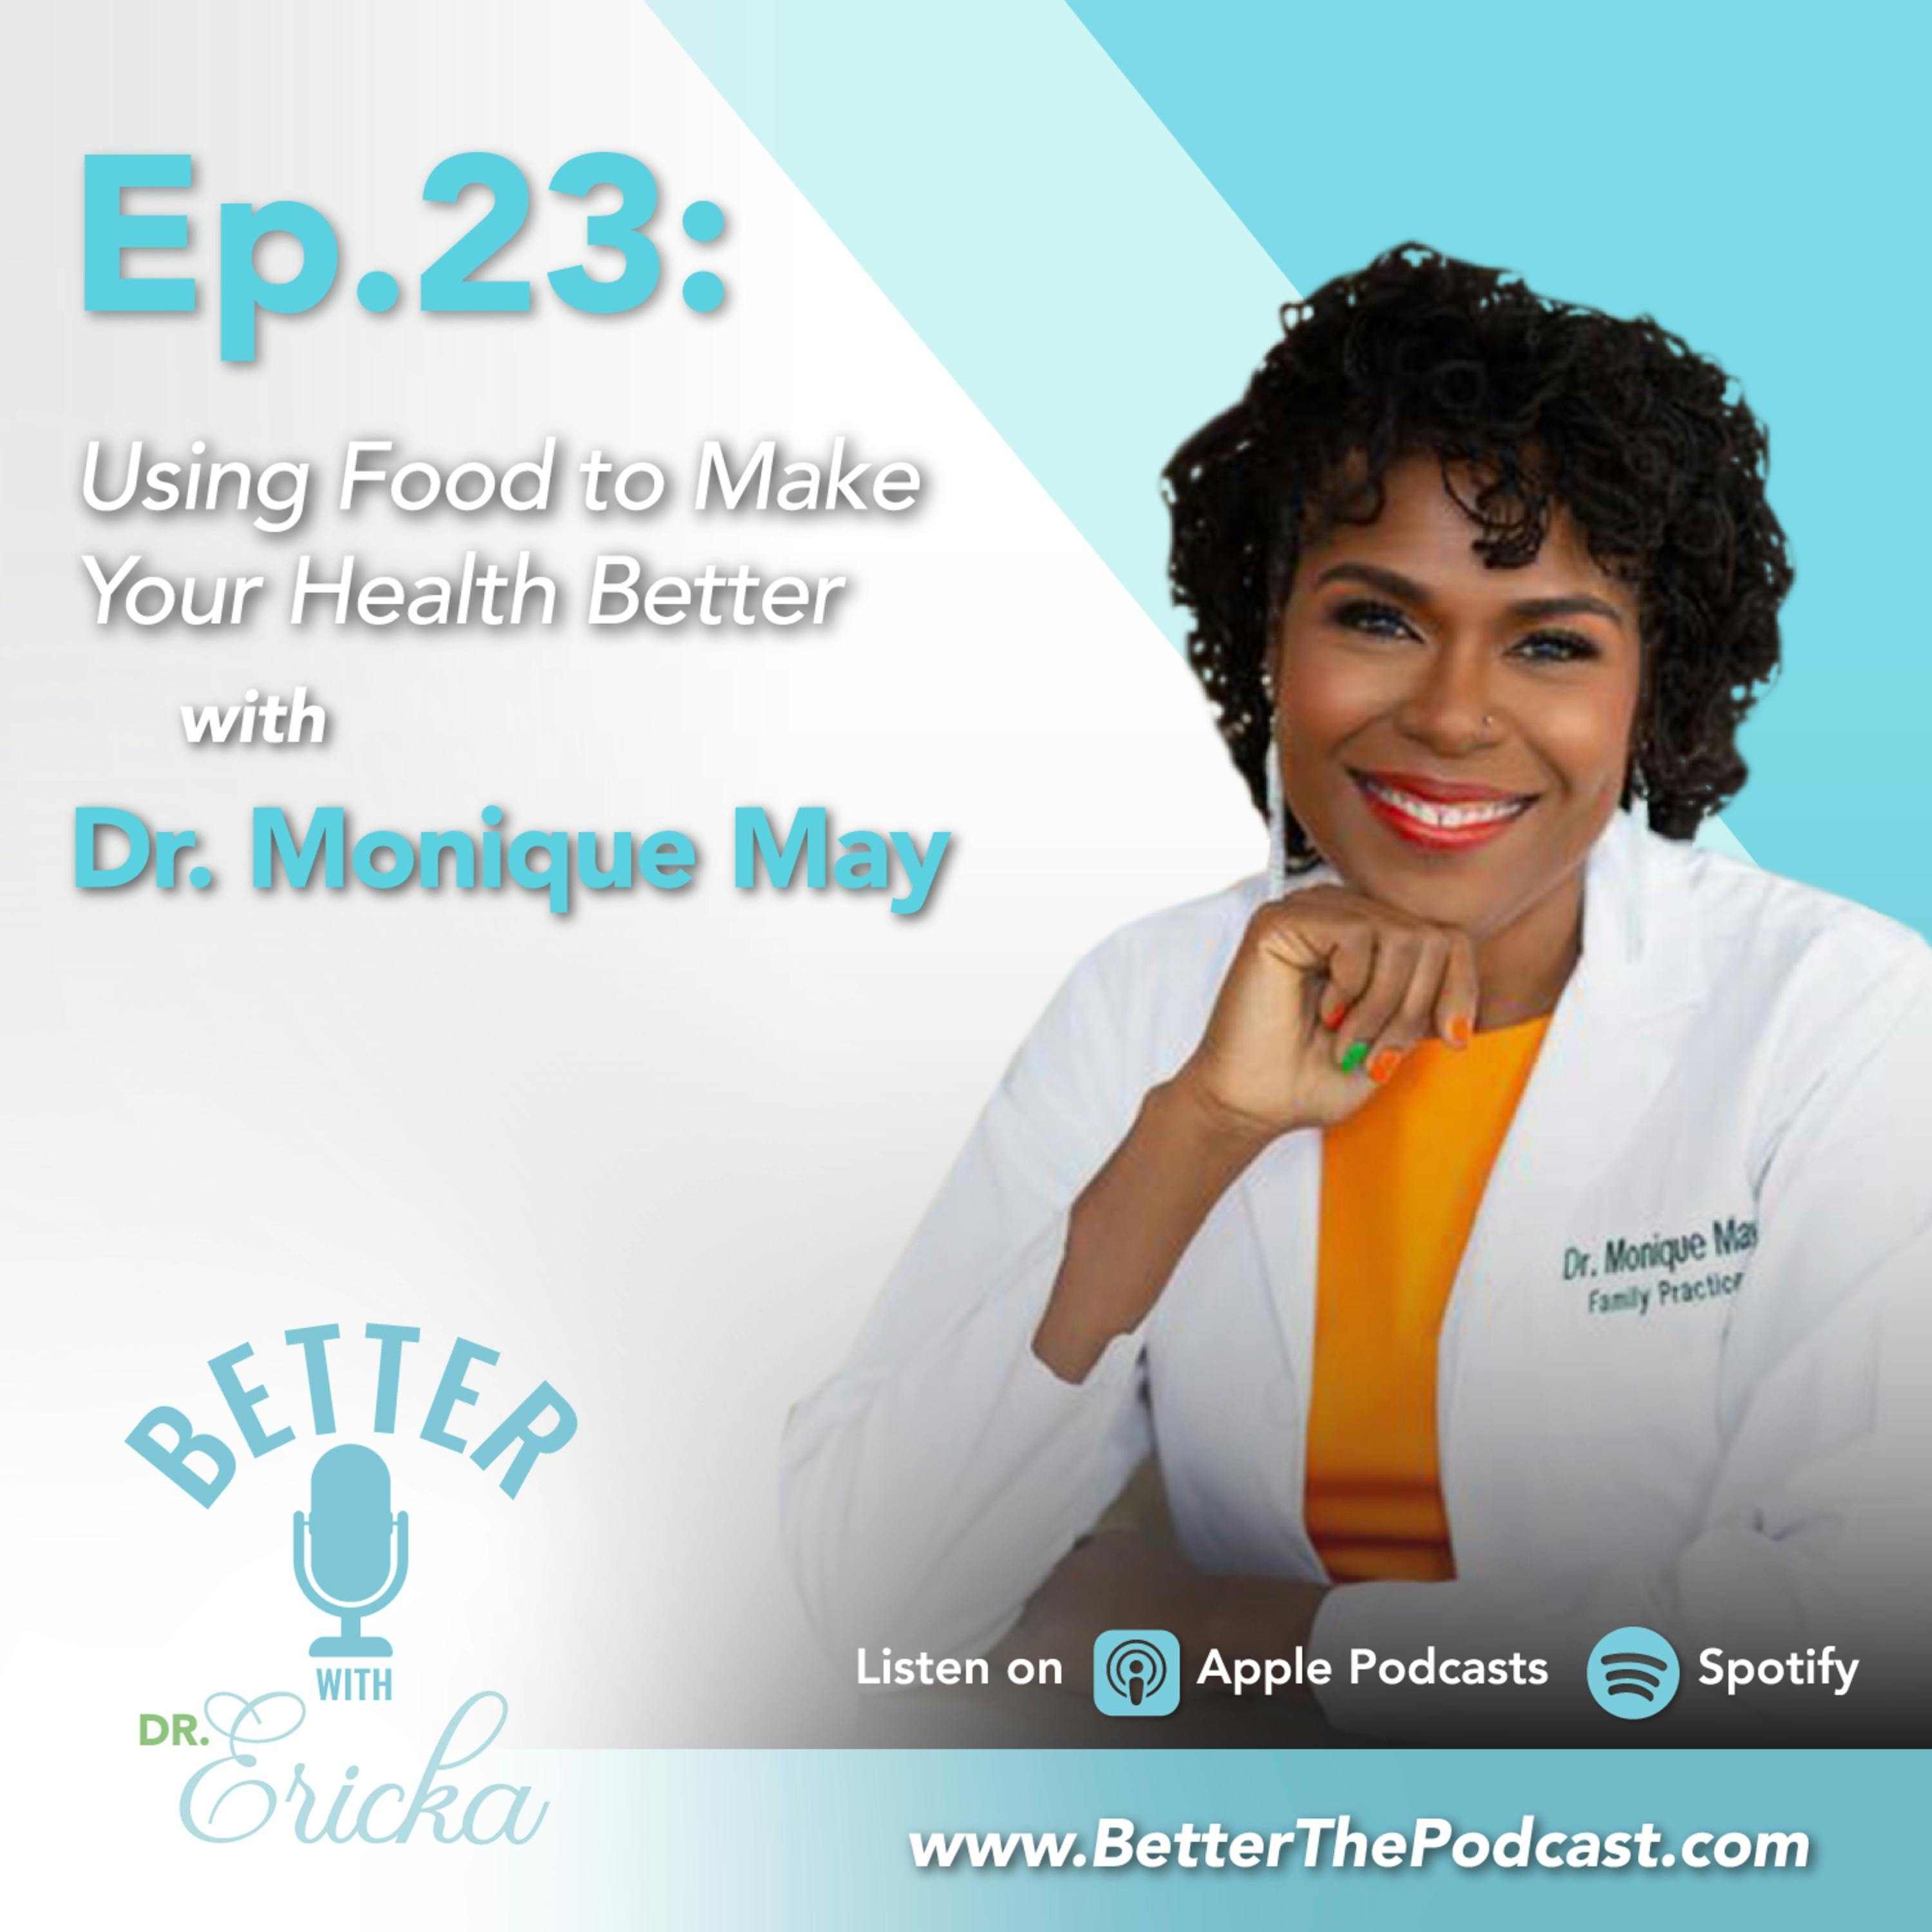 Using Food to Make Your Health Better with Dr. Monique May